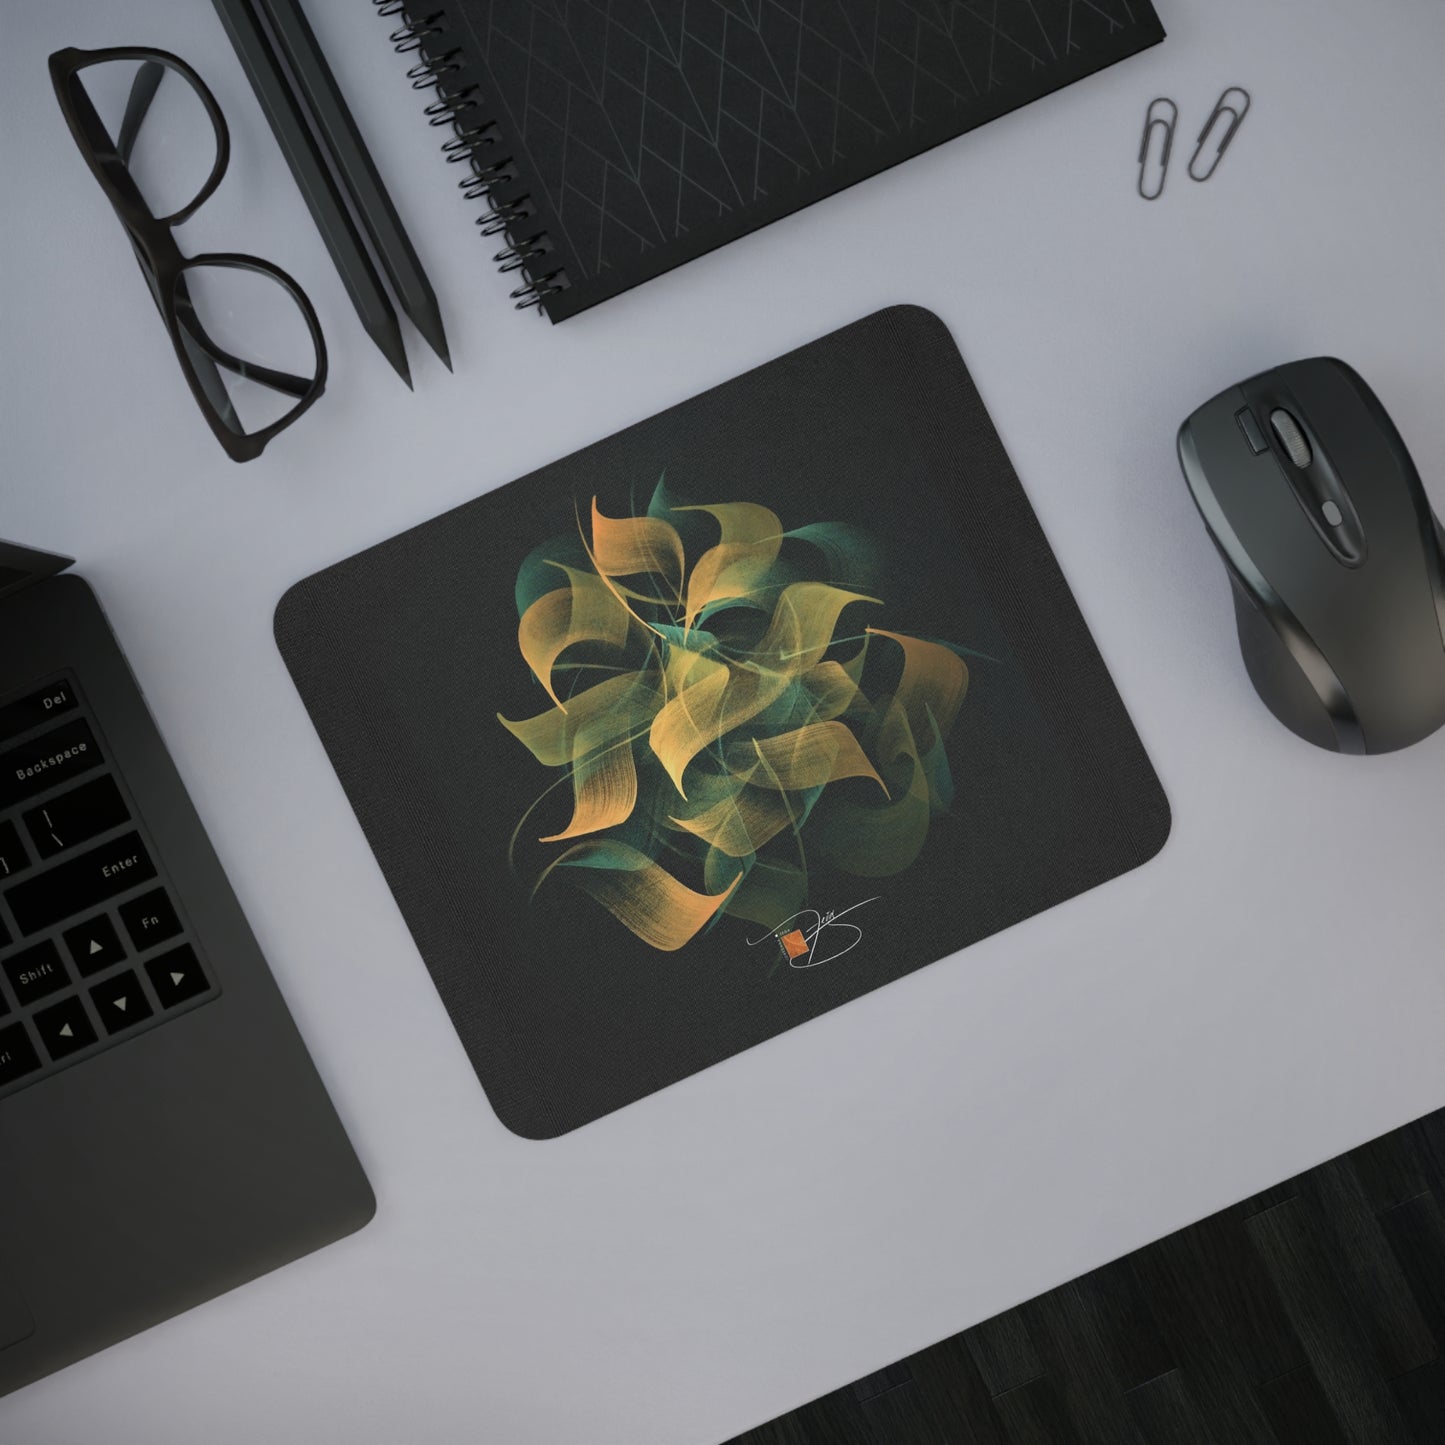 Mouse Pad - "Green"